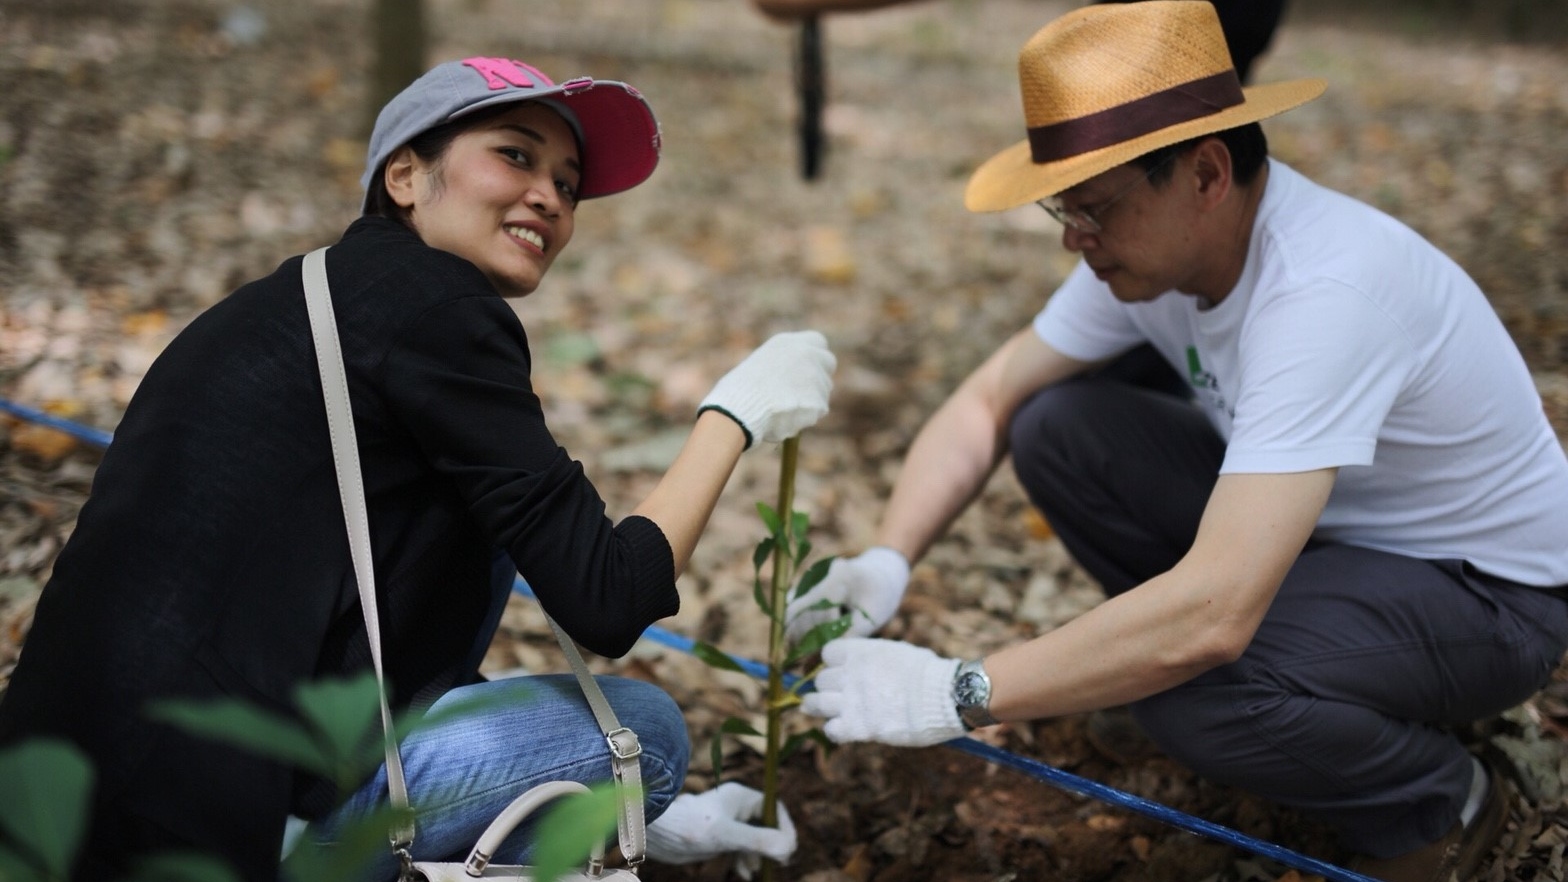 A woman and a man planting a tree together